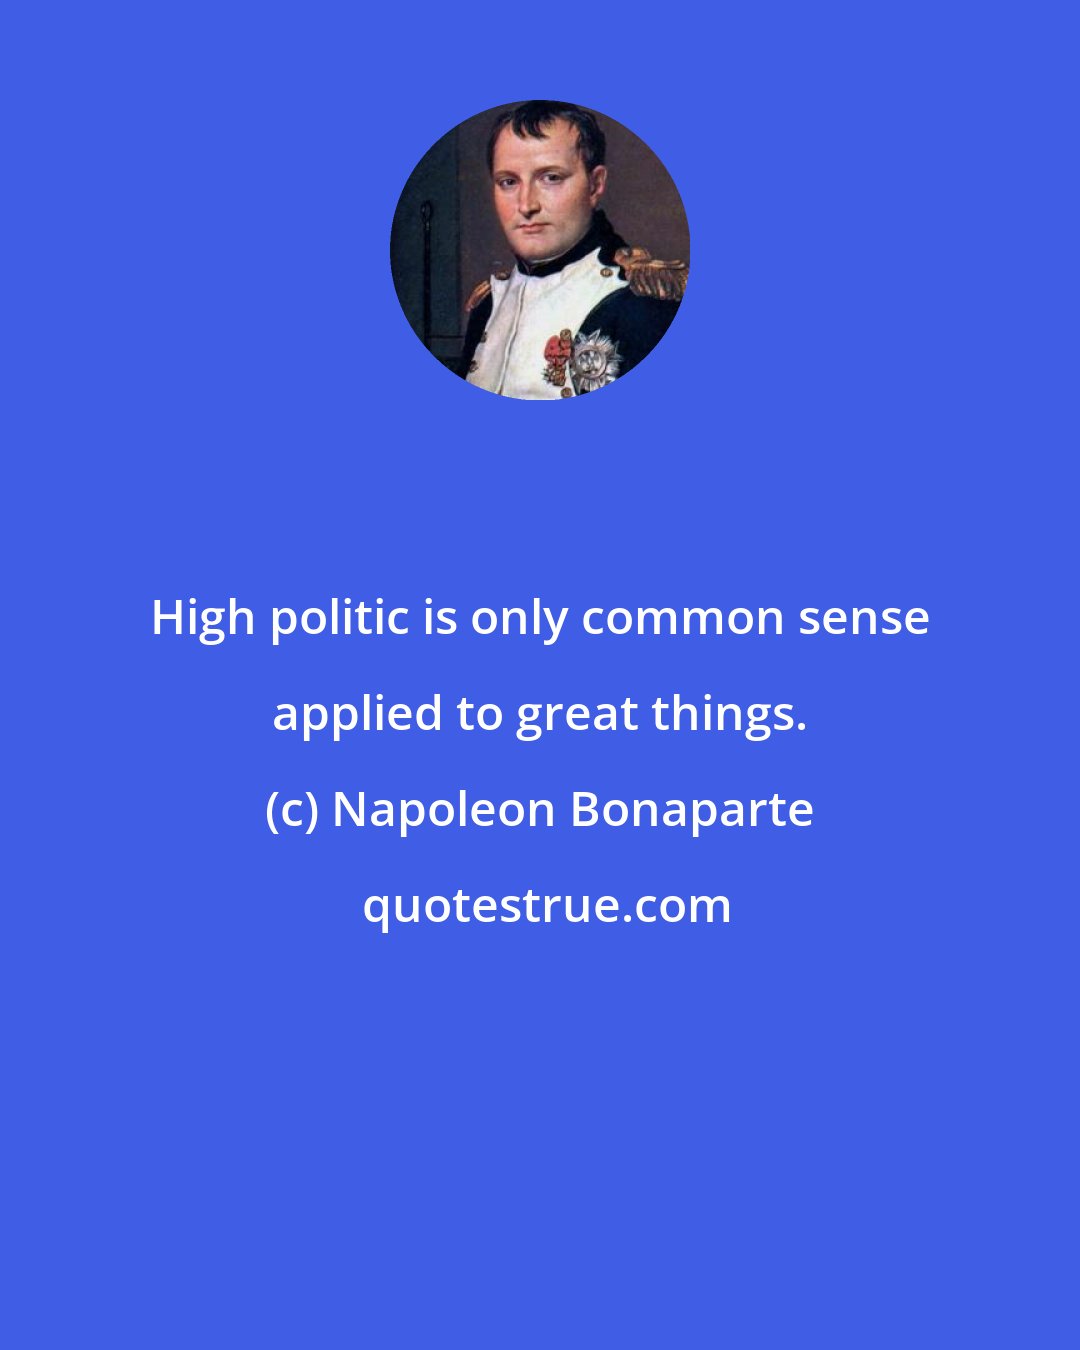 Napoleon Bonaparte: High politic is only common sense applied to great things.